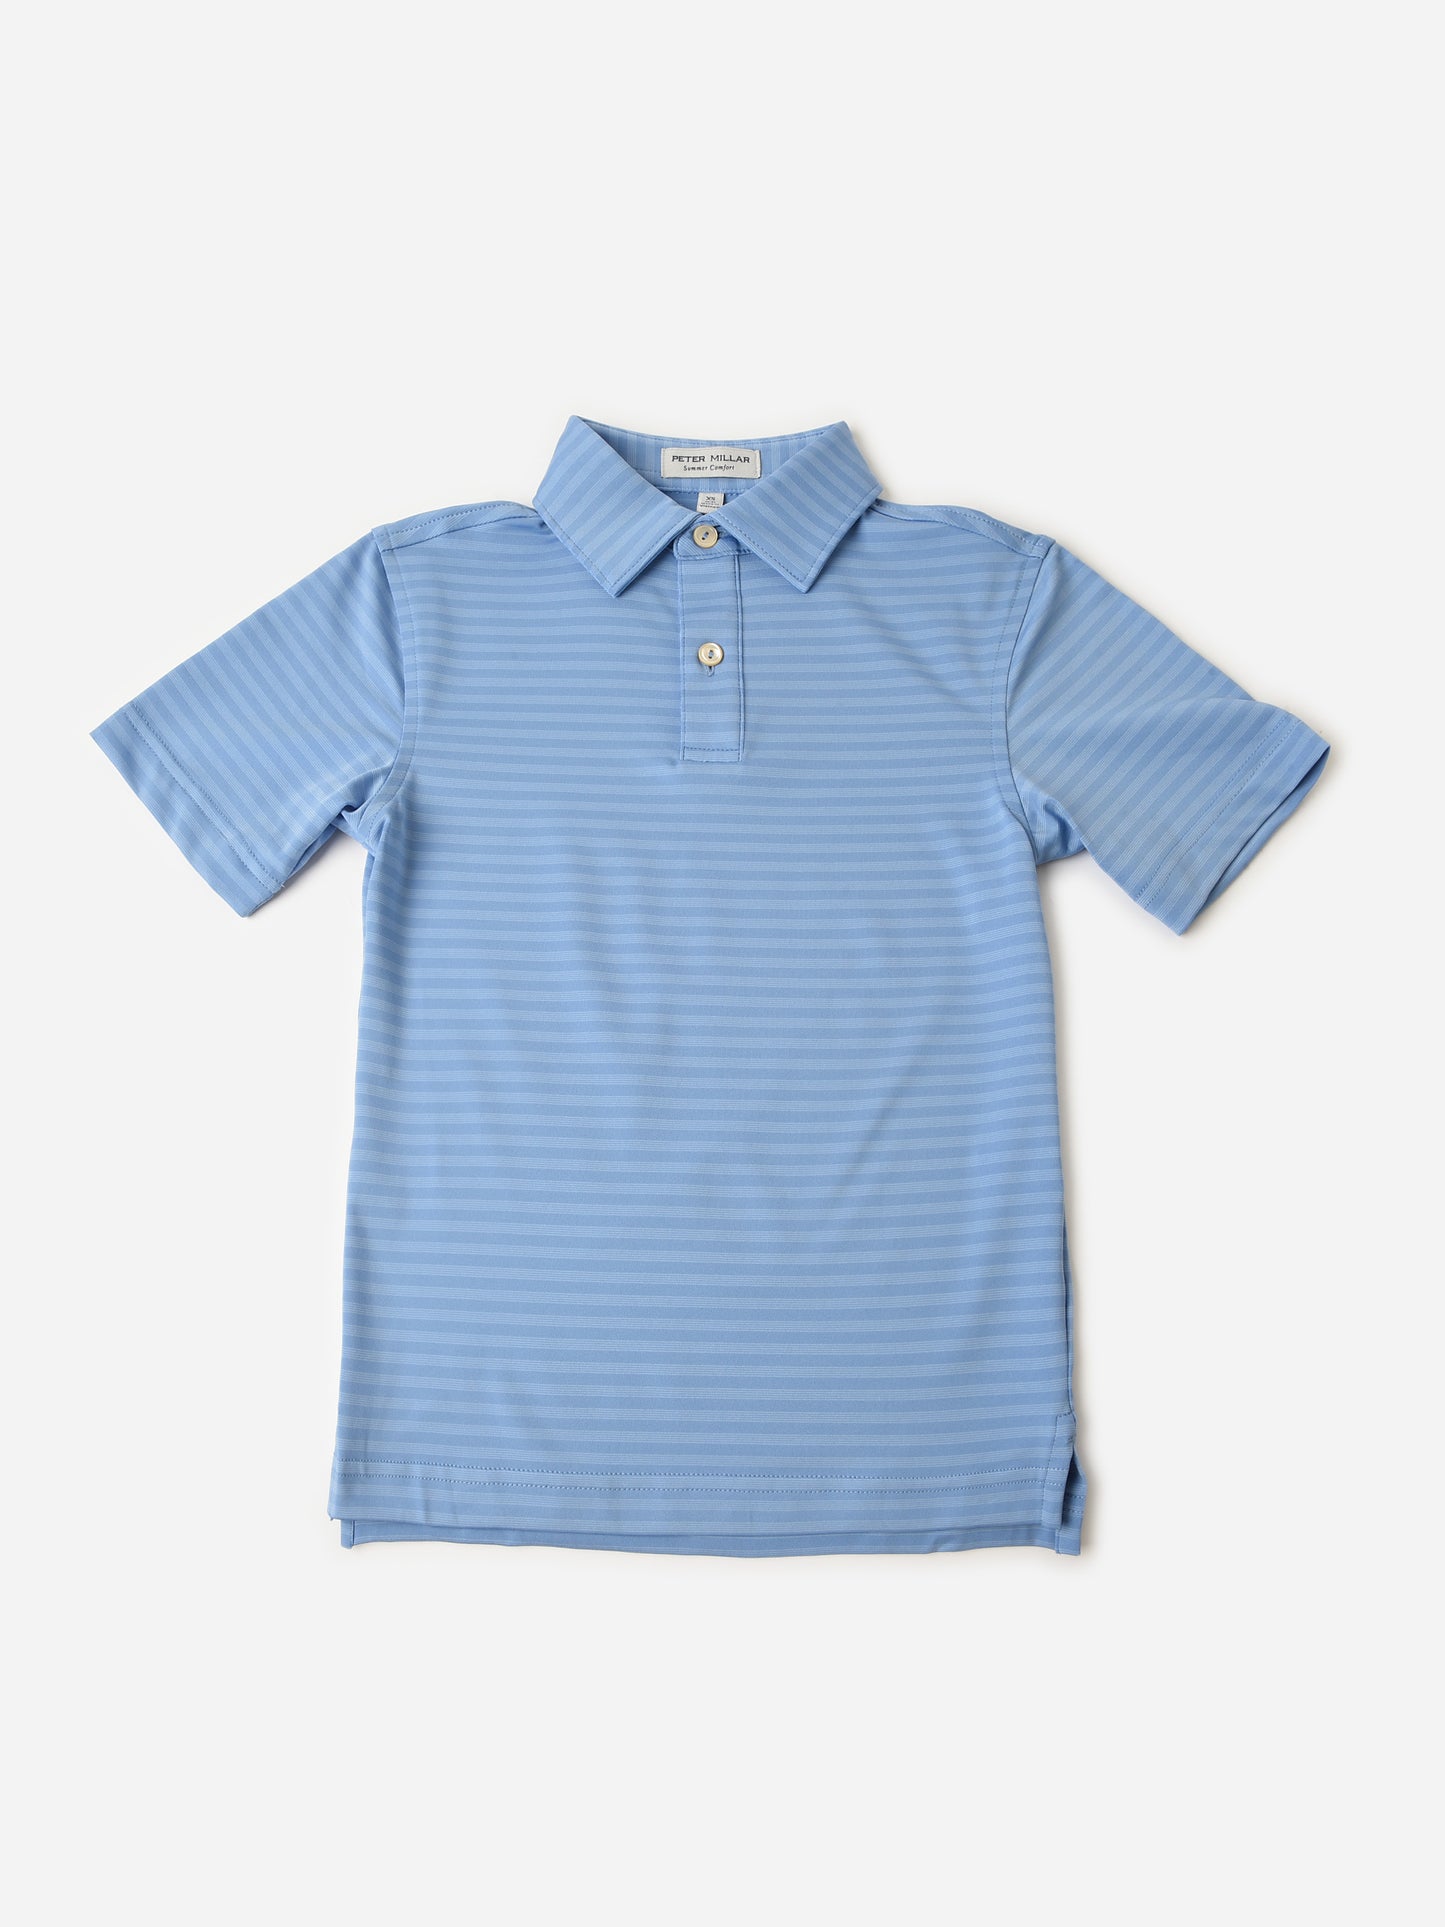 Peter Millar Youth Collection Boys' Baltic Performance Jersey Polo